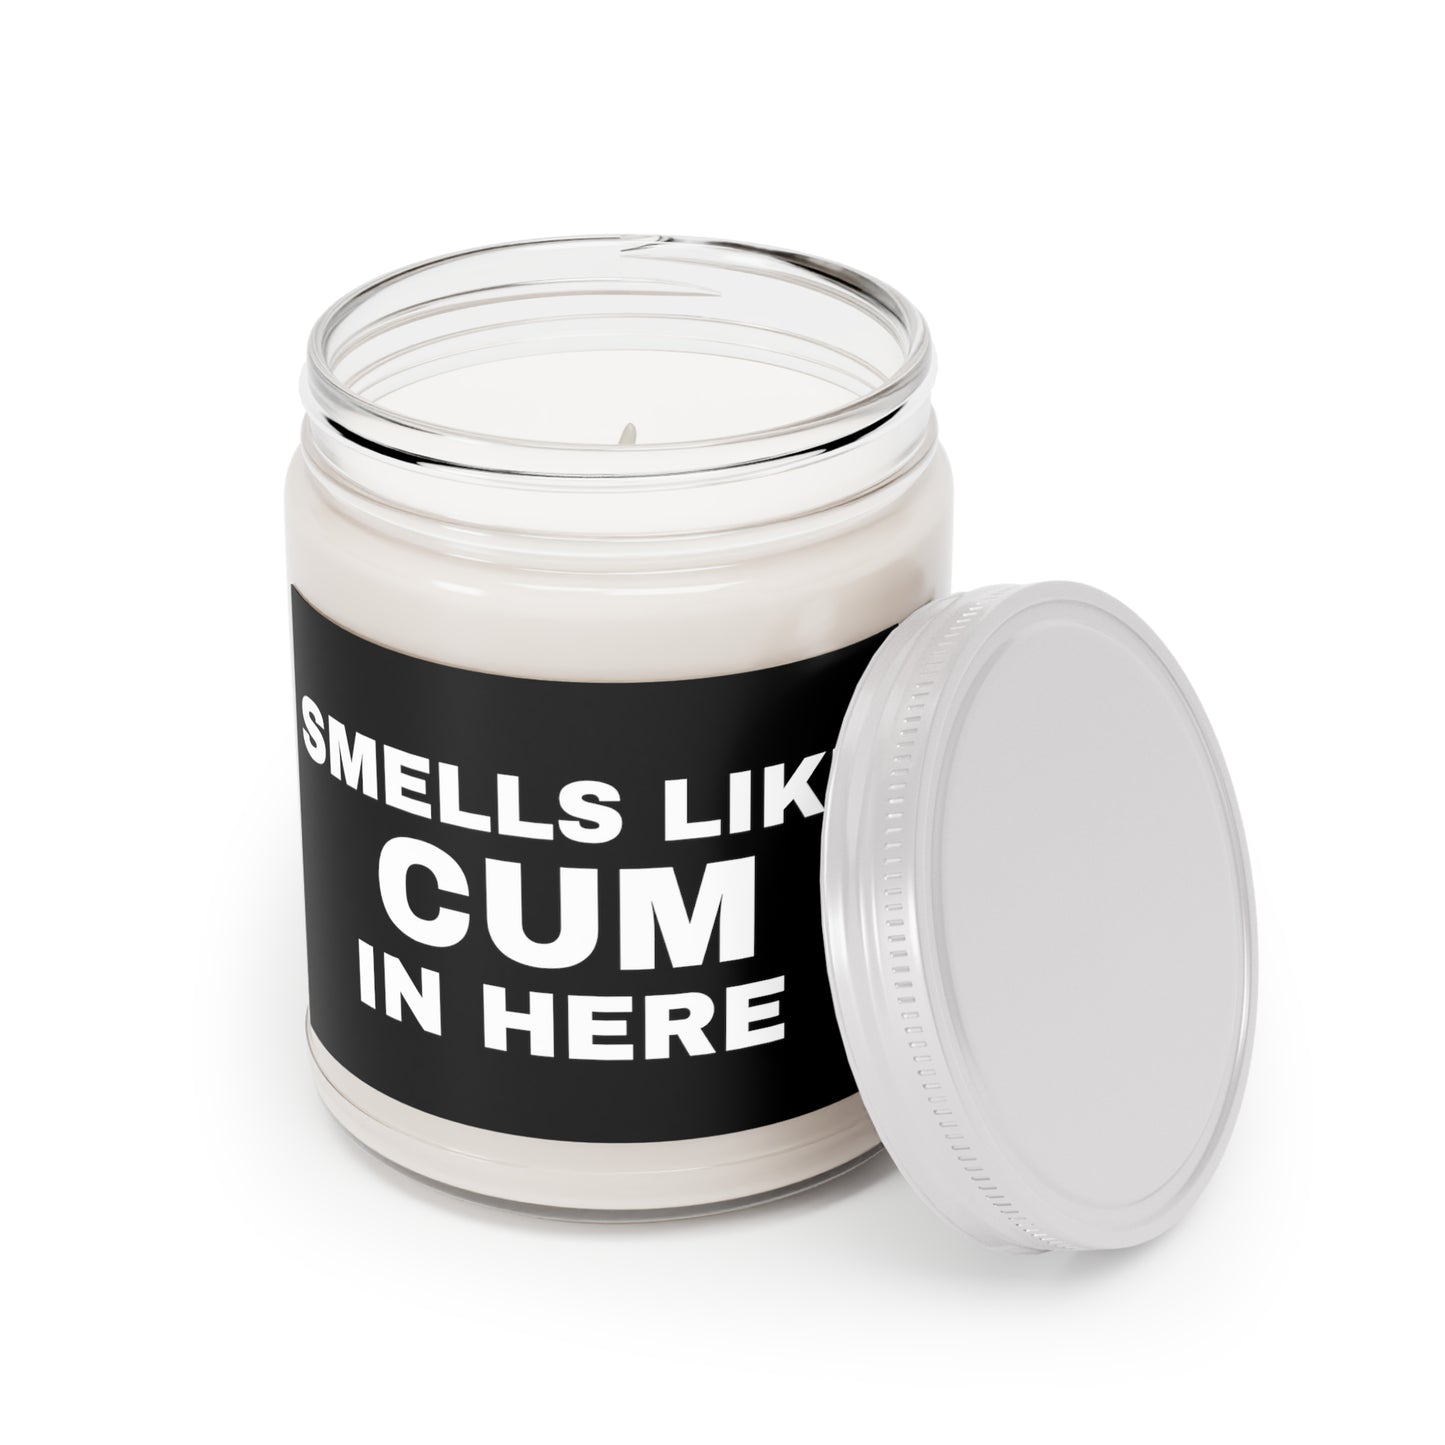 Smells Like Cum in Here Candle